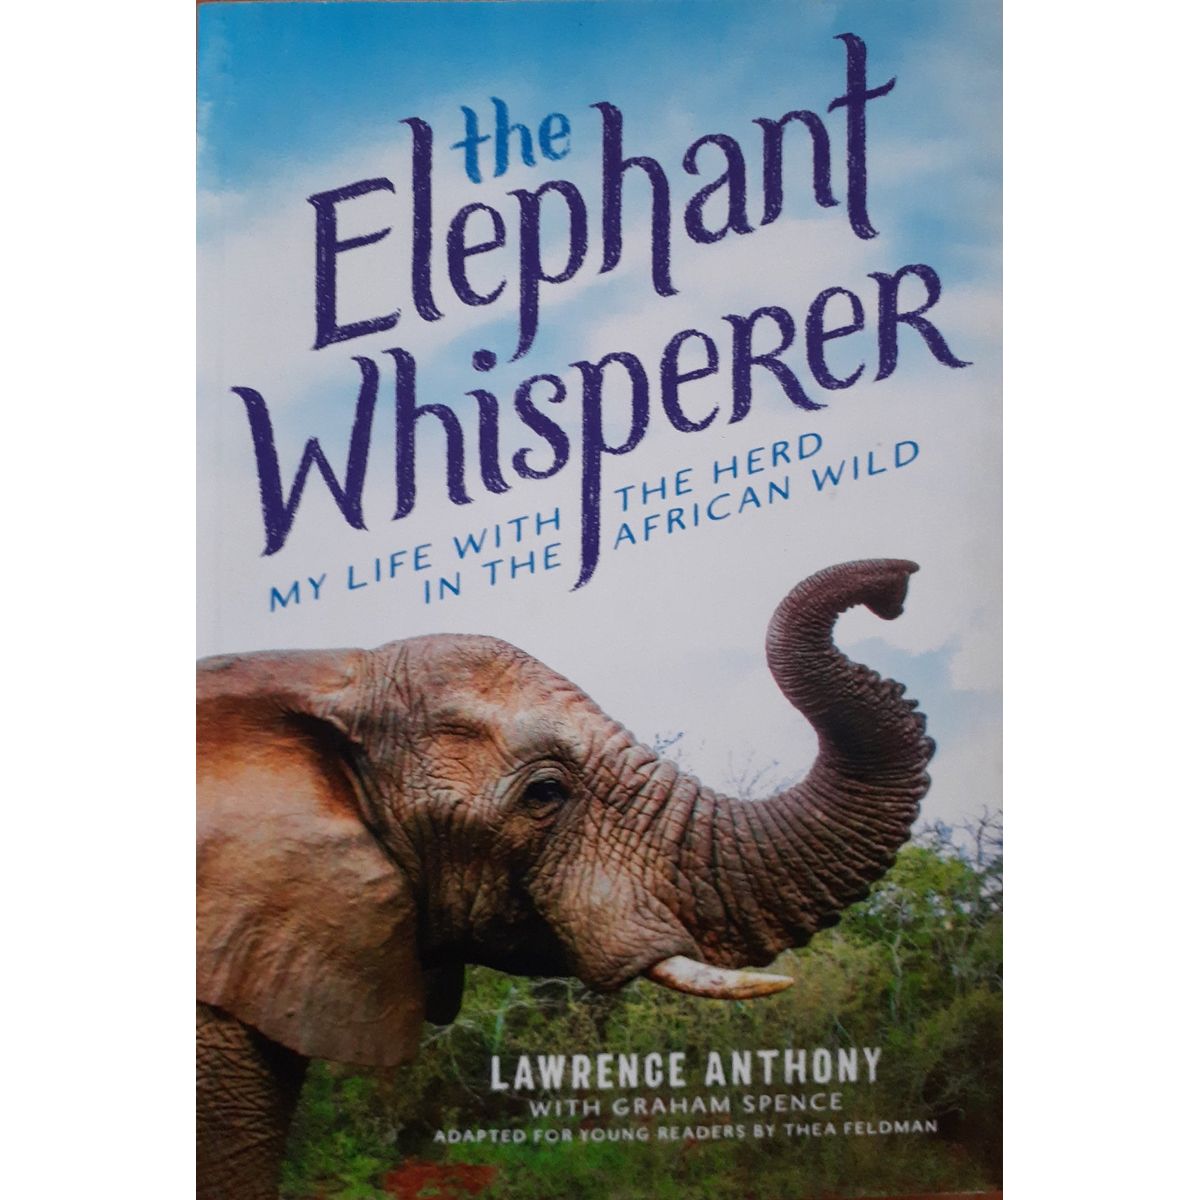 ISBN: 9781250197023 / 1250197023 - The Elephant Whisperer by Lawrence Anthony and Graham Spence, adapted for young readers by Thea Feldman [2017]